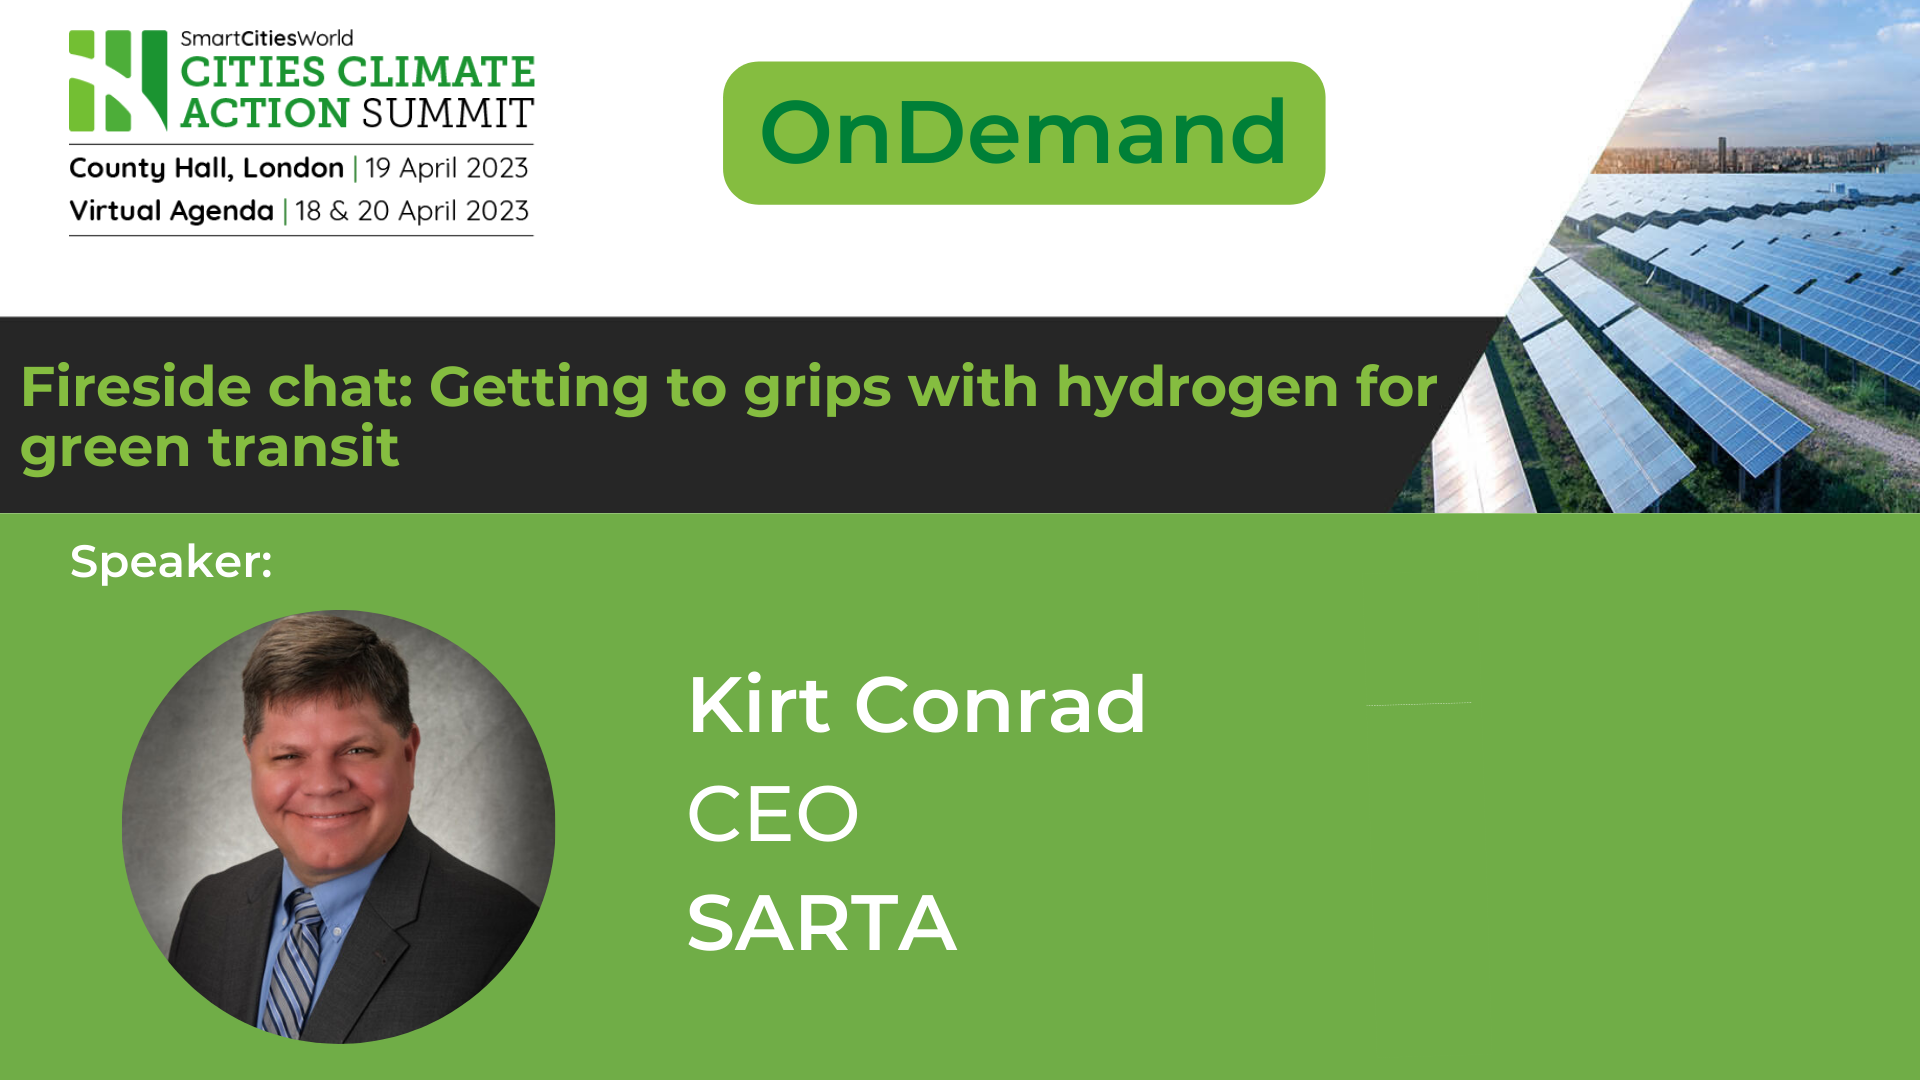 OnDemand Fireside chat: Getting to grips with hydrogen for green transit